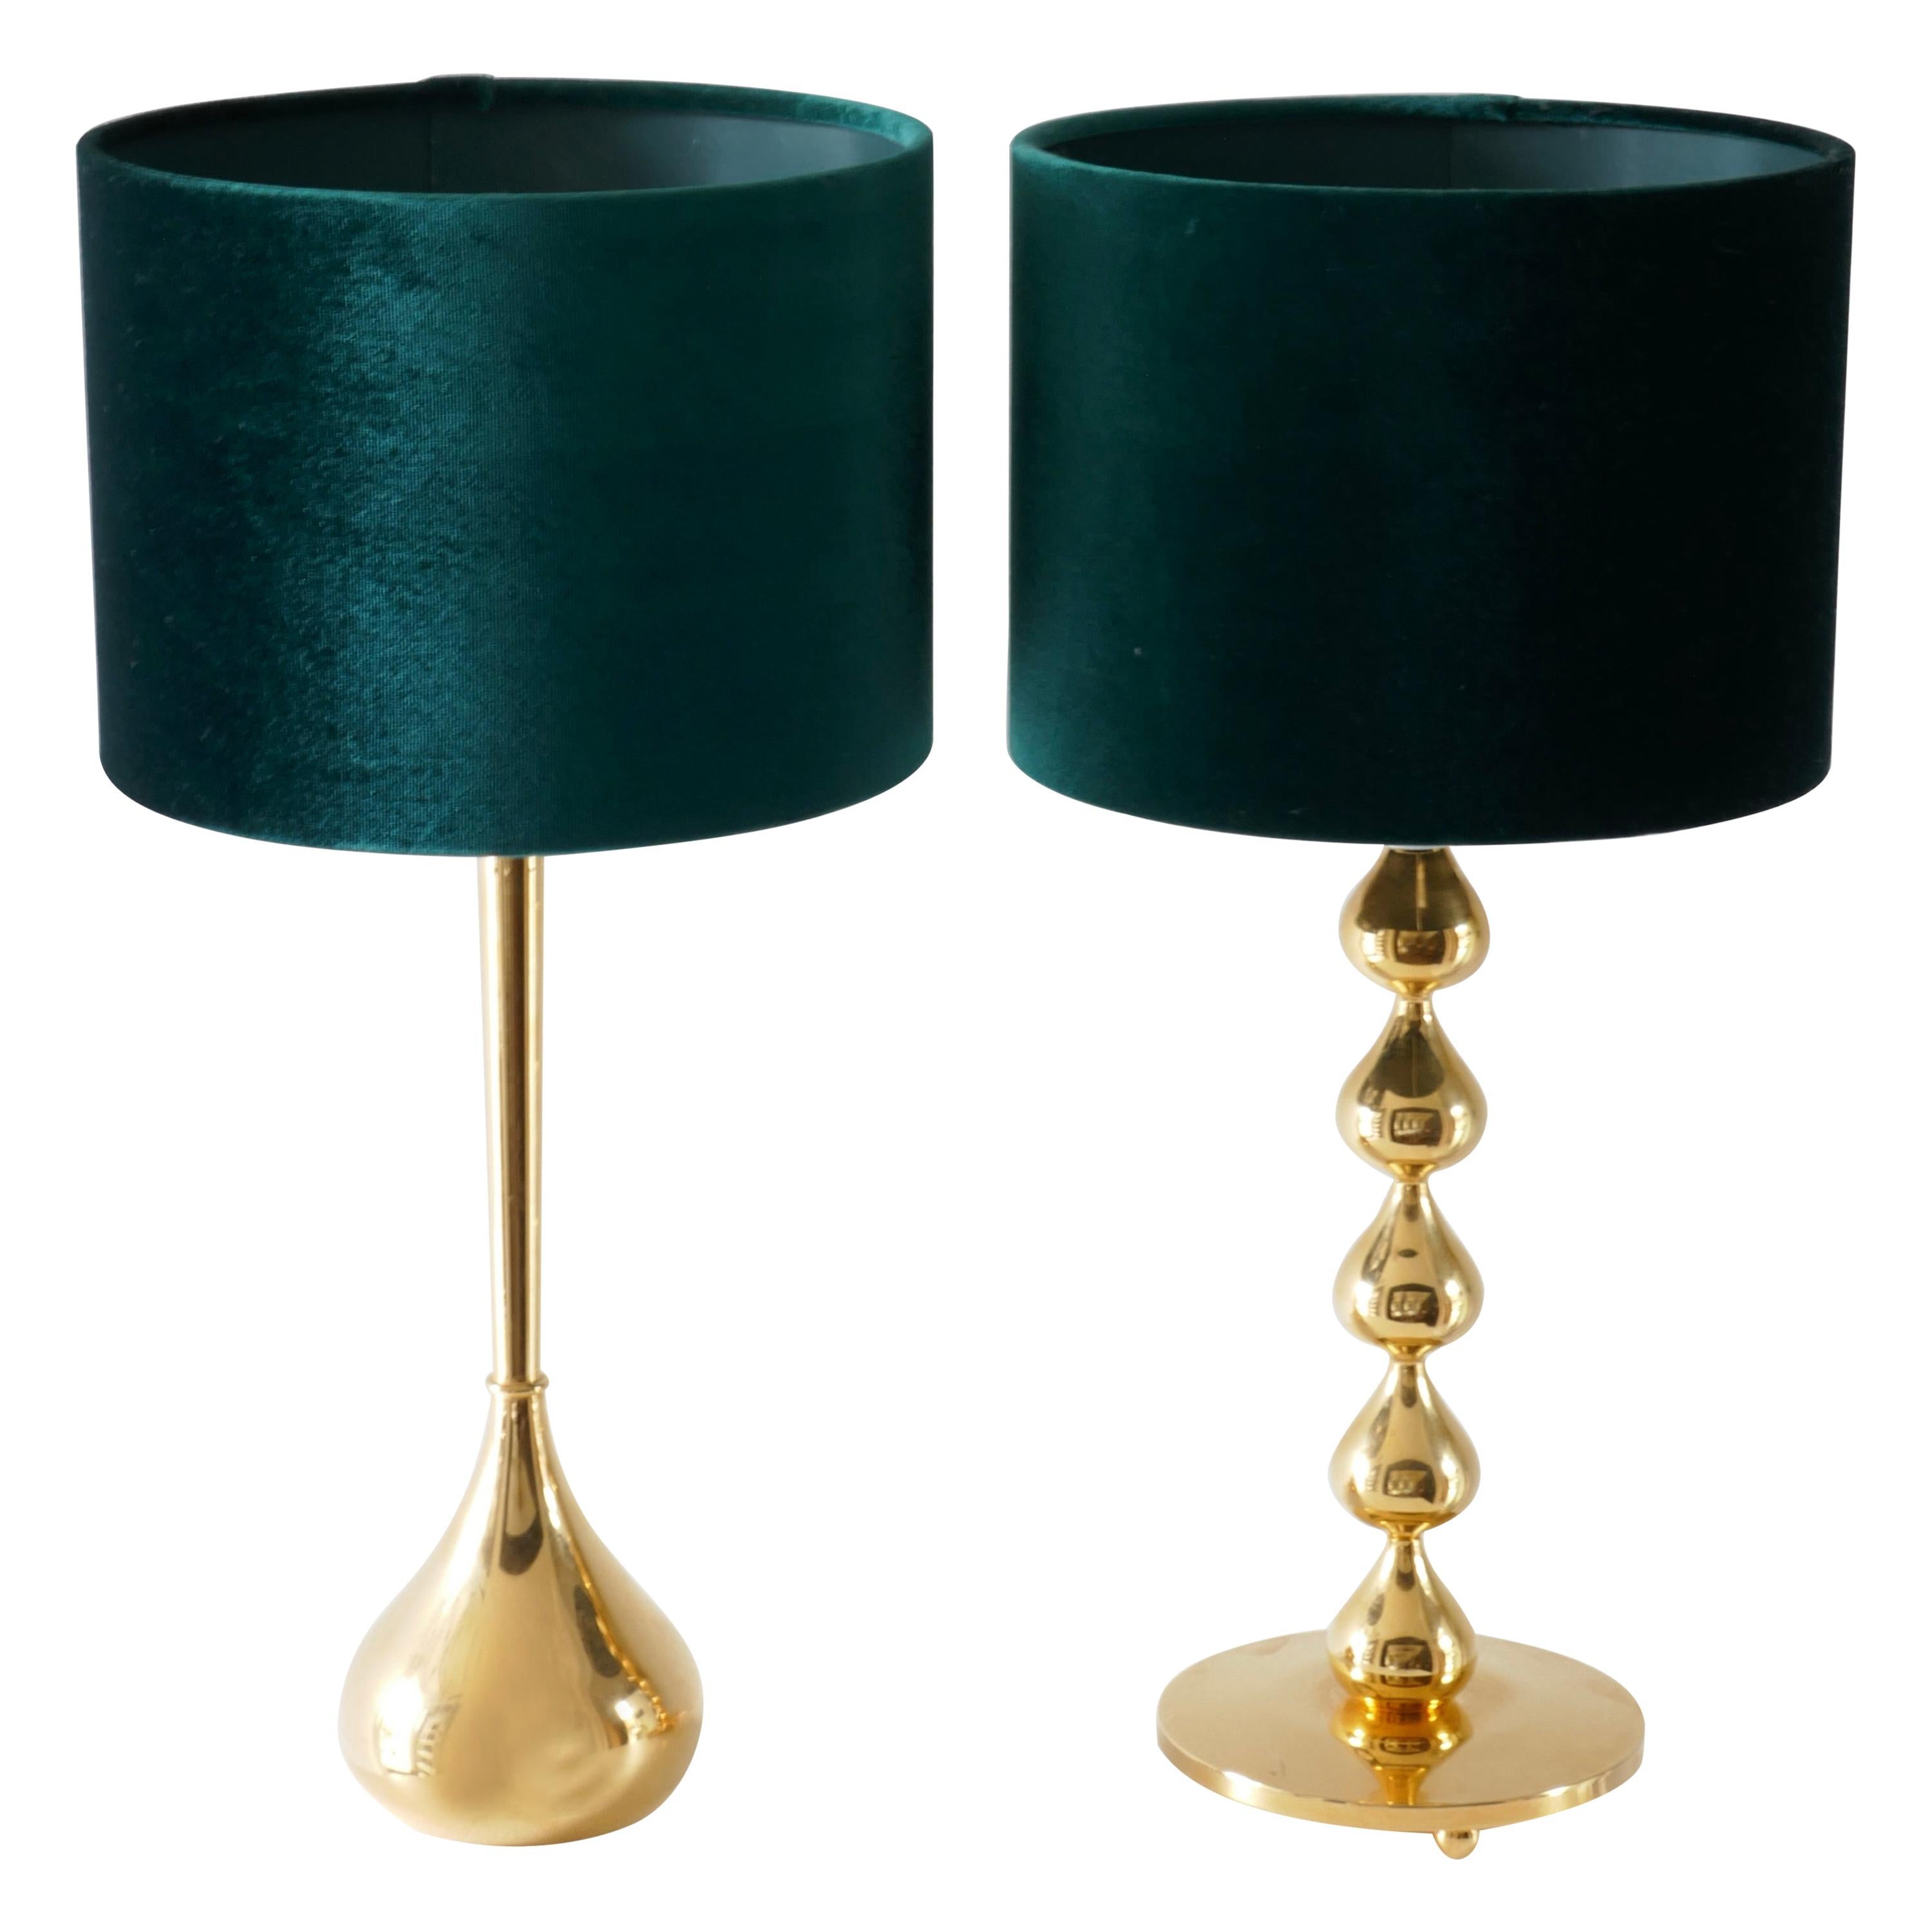 Set of Two Danish 24-Carat Gold-Plated Brass Table Lamps by Hugo Asmussen, 1960s